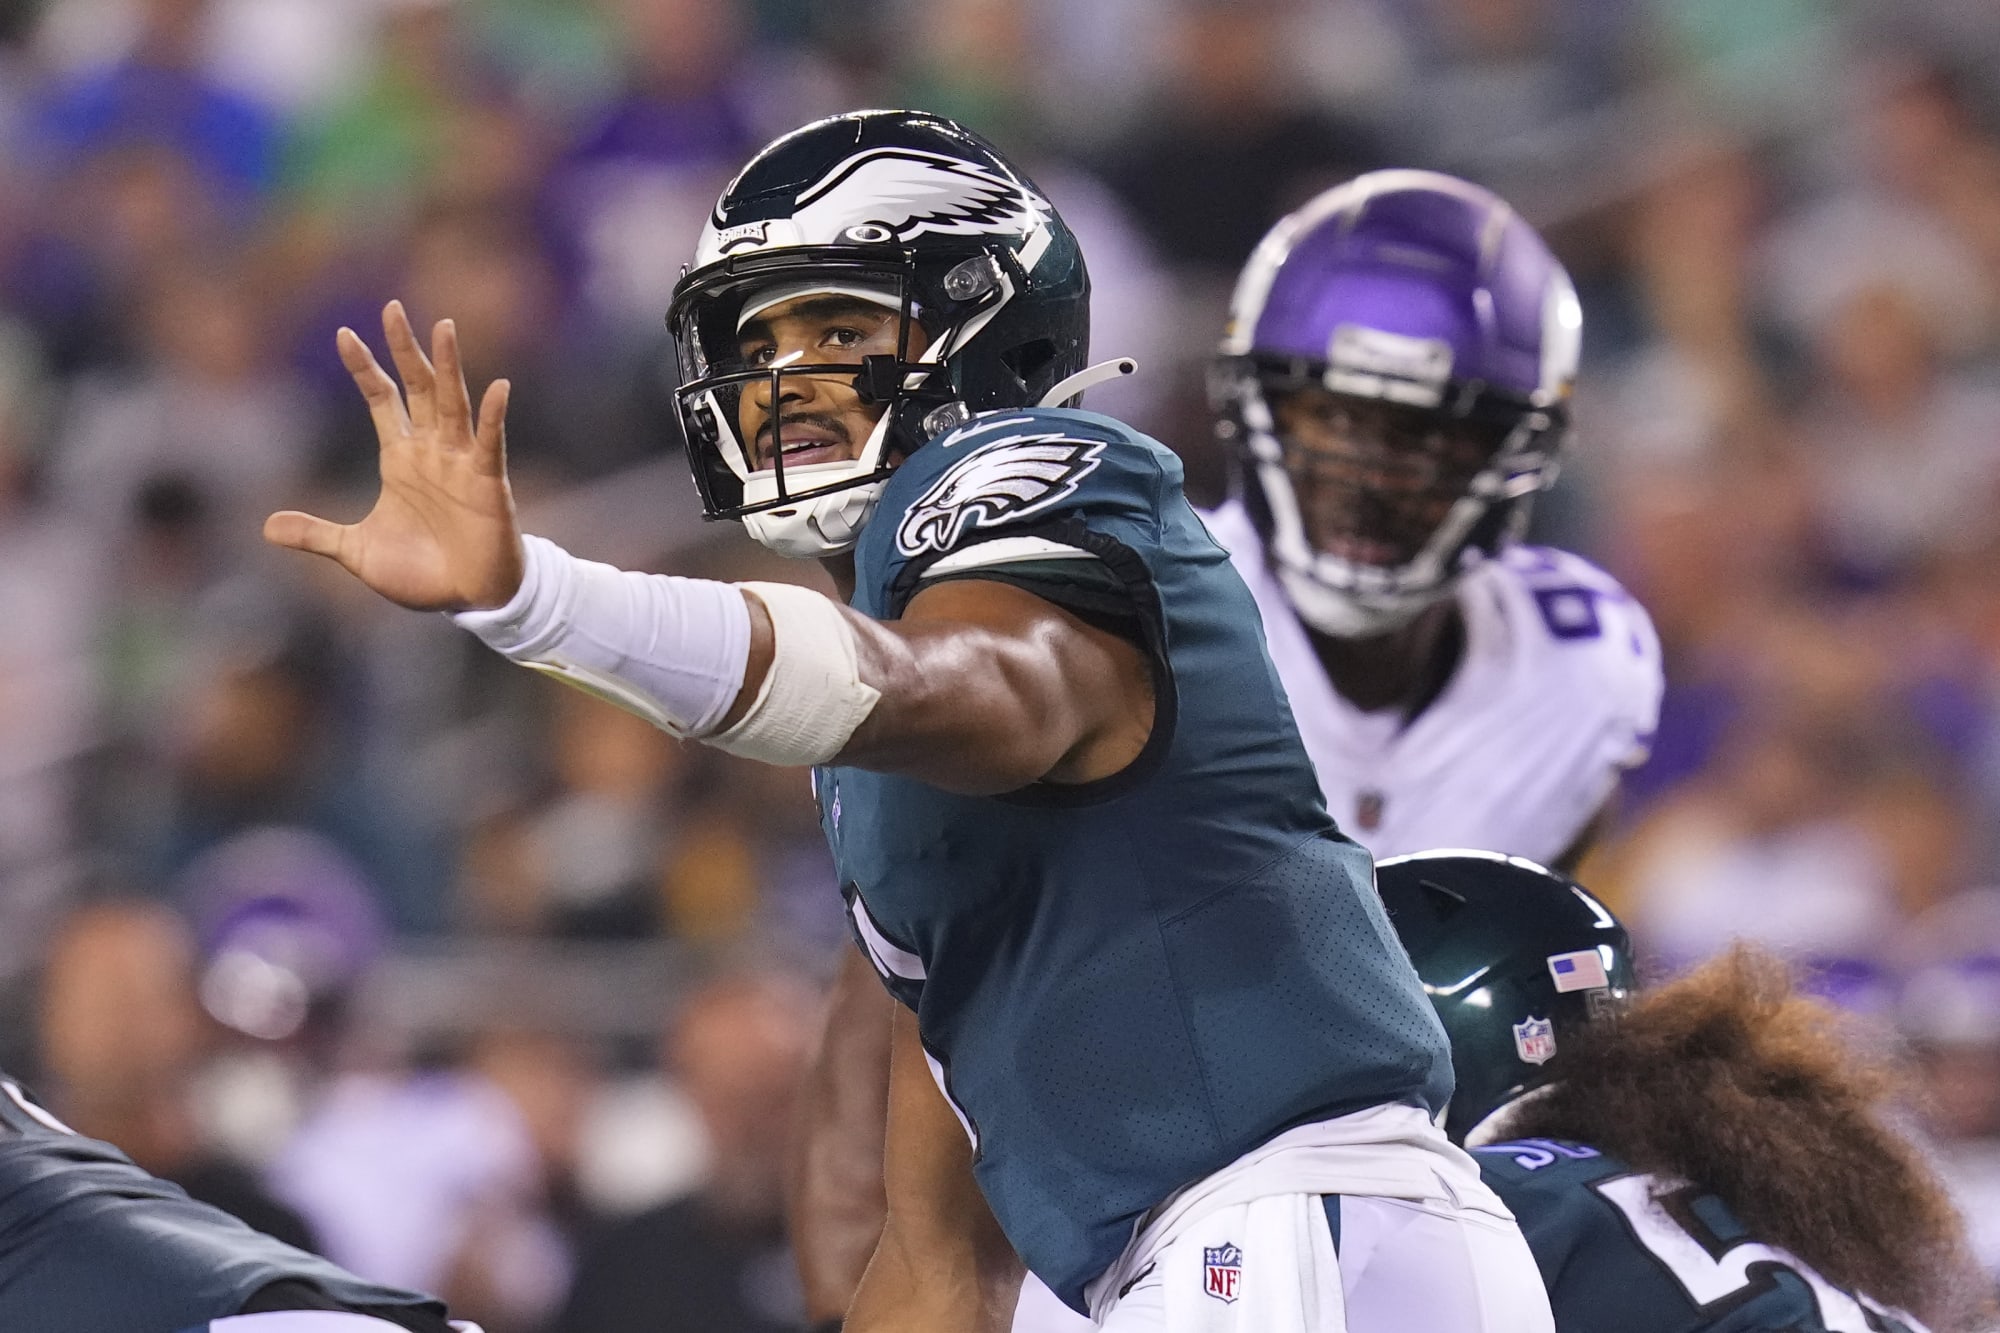 Eagles vs Commanders Best Anytime TD Scorer Picks (Hurts and Dotson Among Values to Win Big)